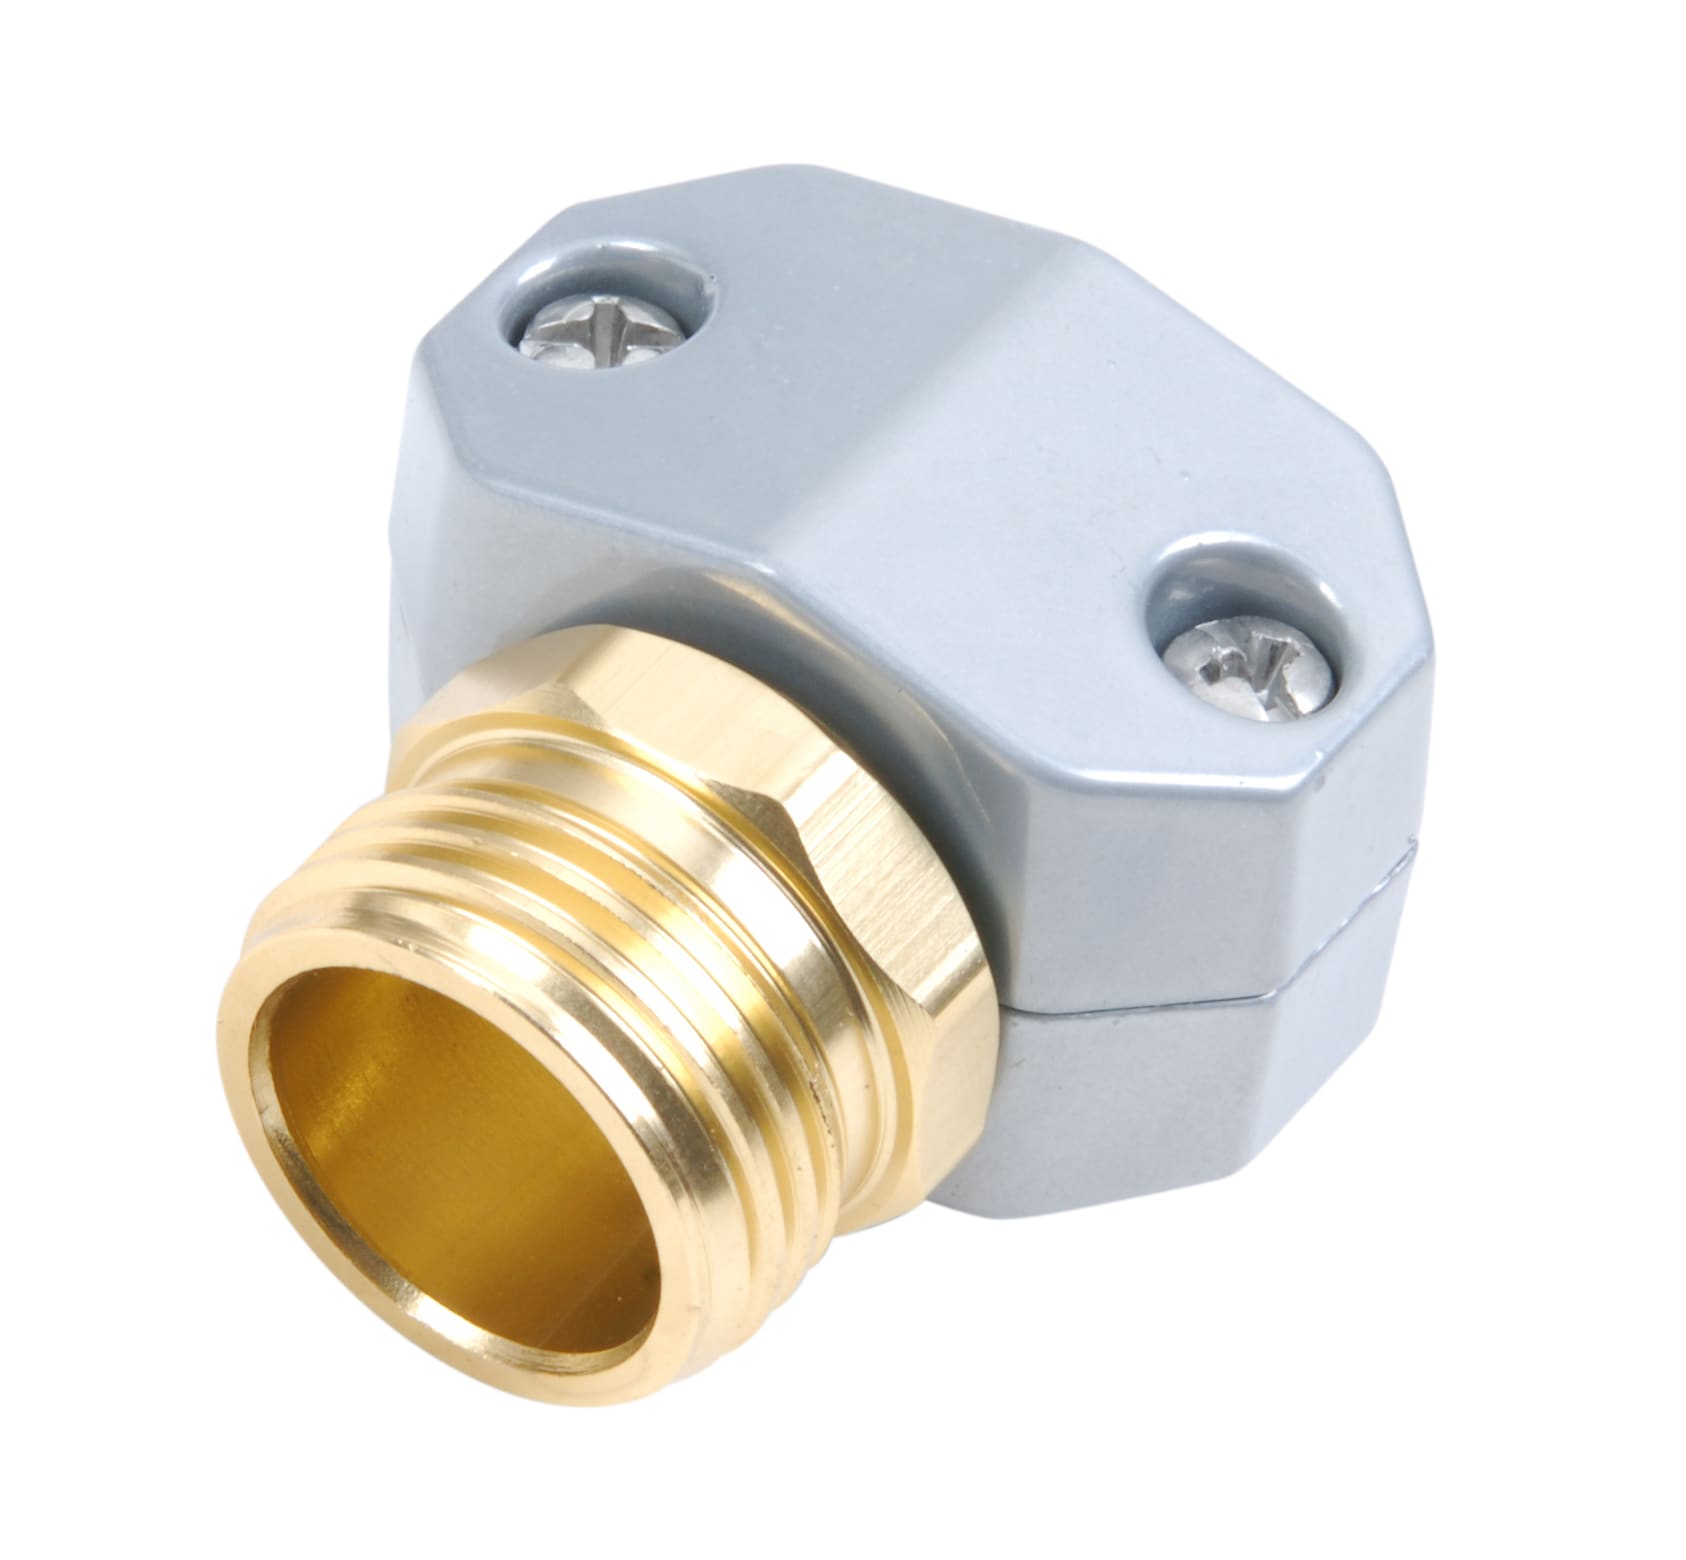 Male and Female Garden Hose End Repair Fittings 2 Set PLG Brass 5/8 Hose Repair Connector with Clamps 